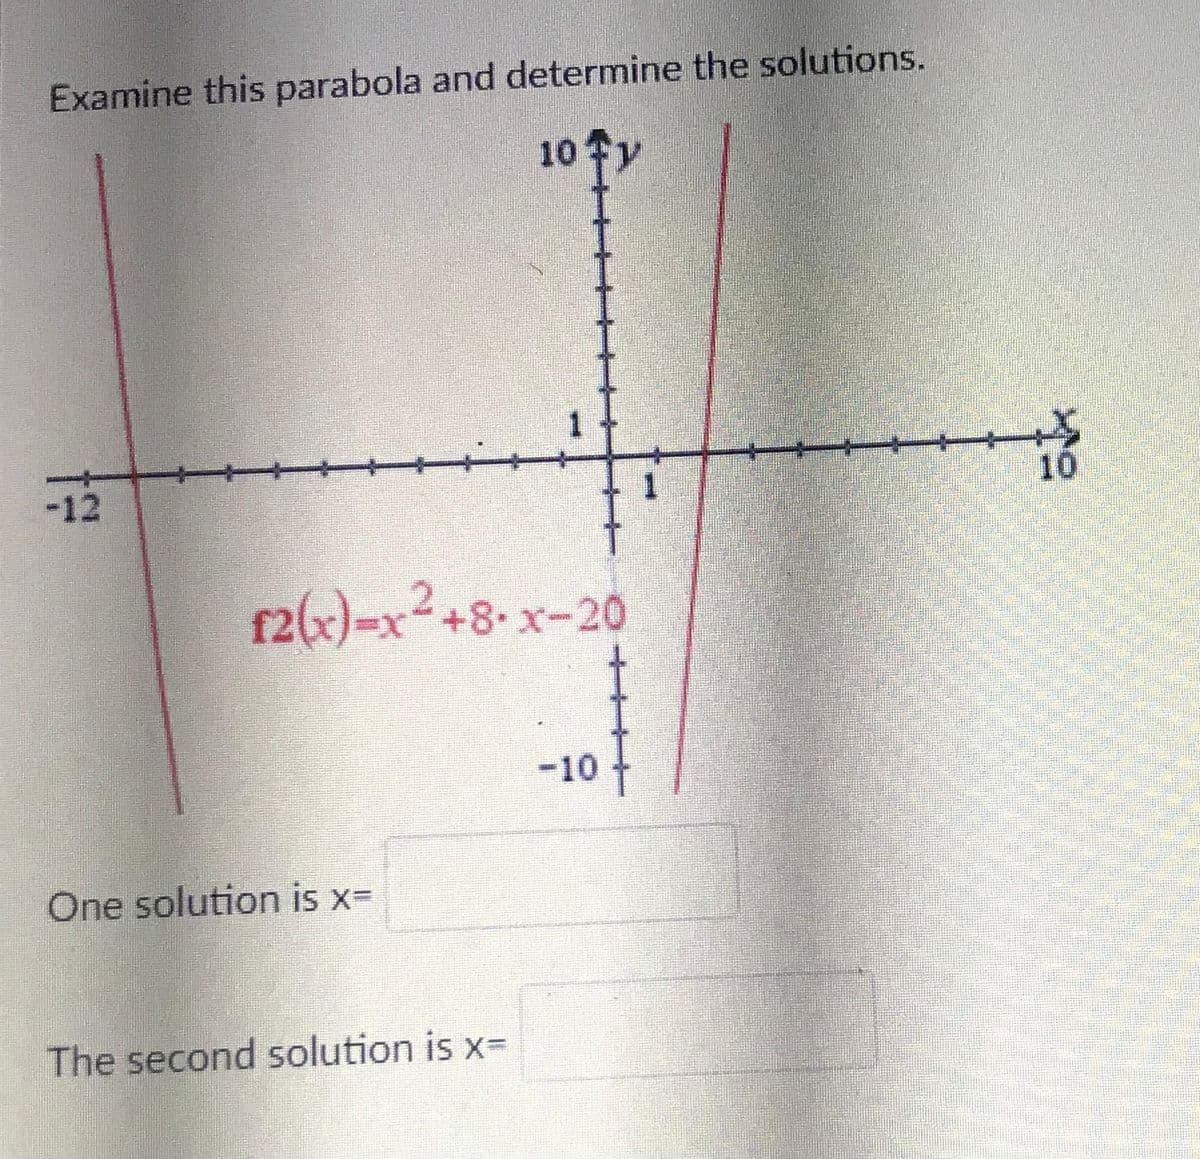 Examine this parabola and determine the solutions.
10 y
-12
10
f2(x)=x2+8•x-20
-10
One solution is x=
The second solution is xD
